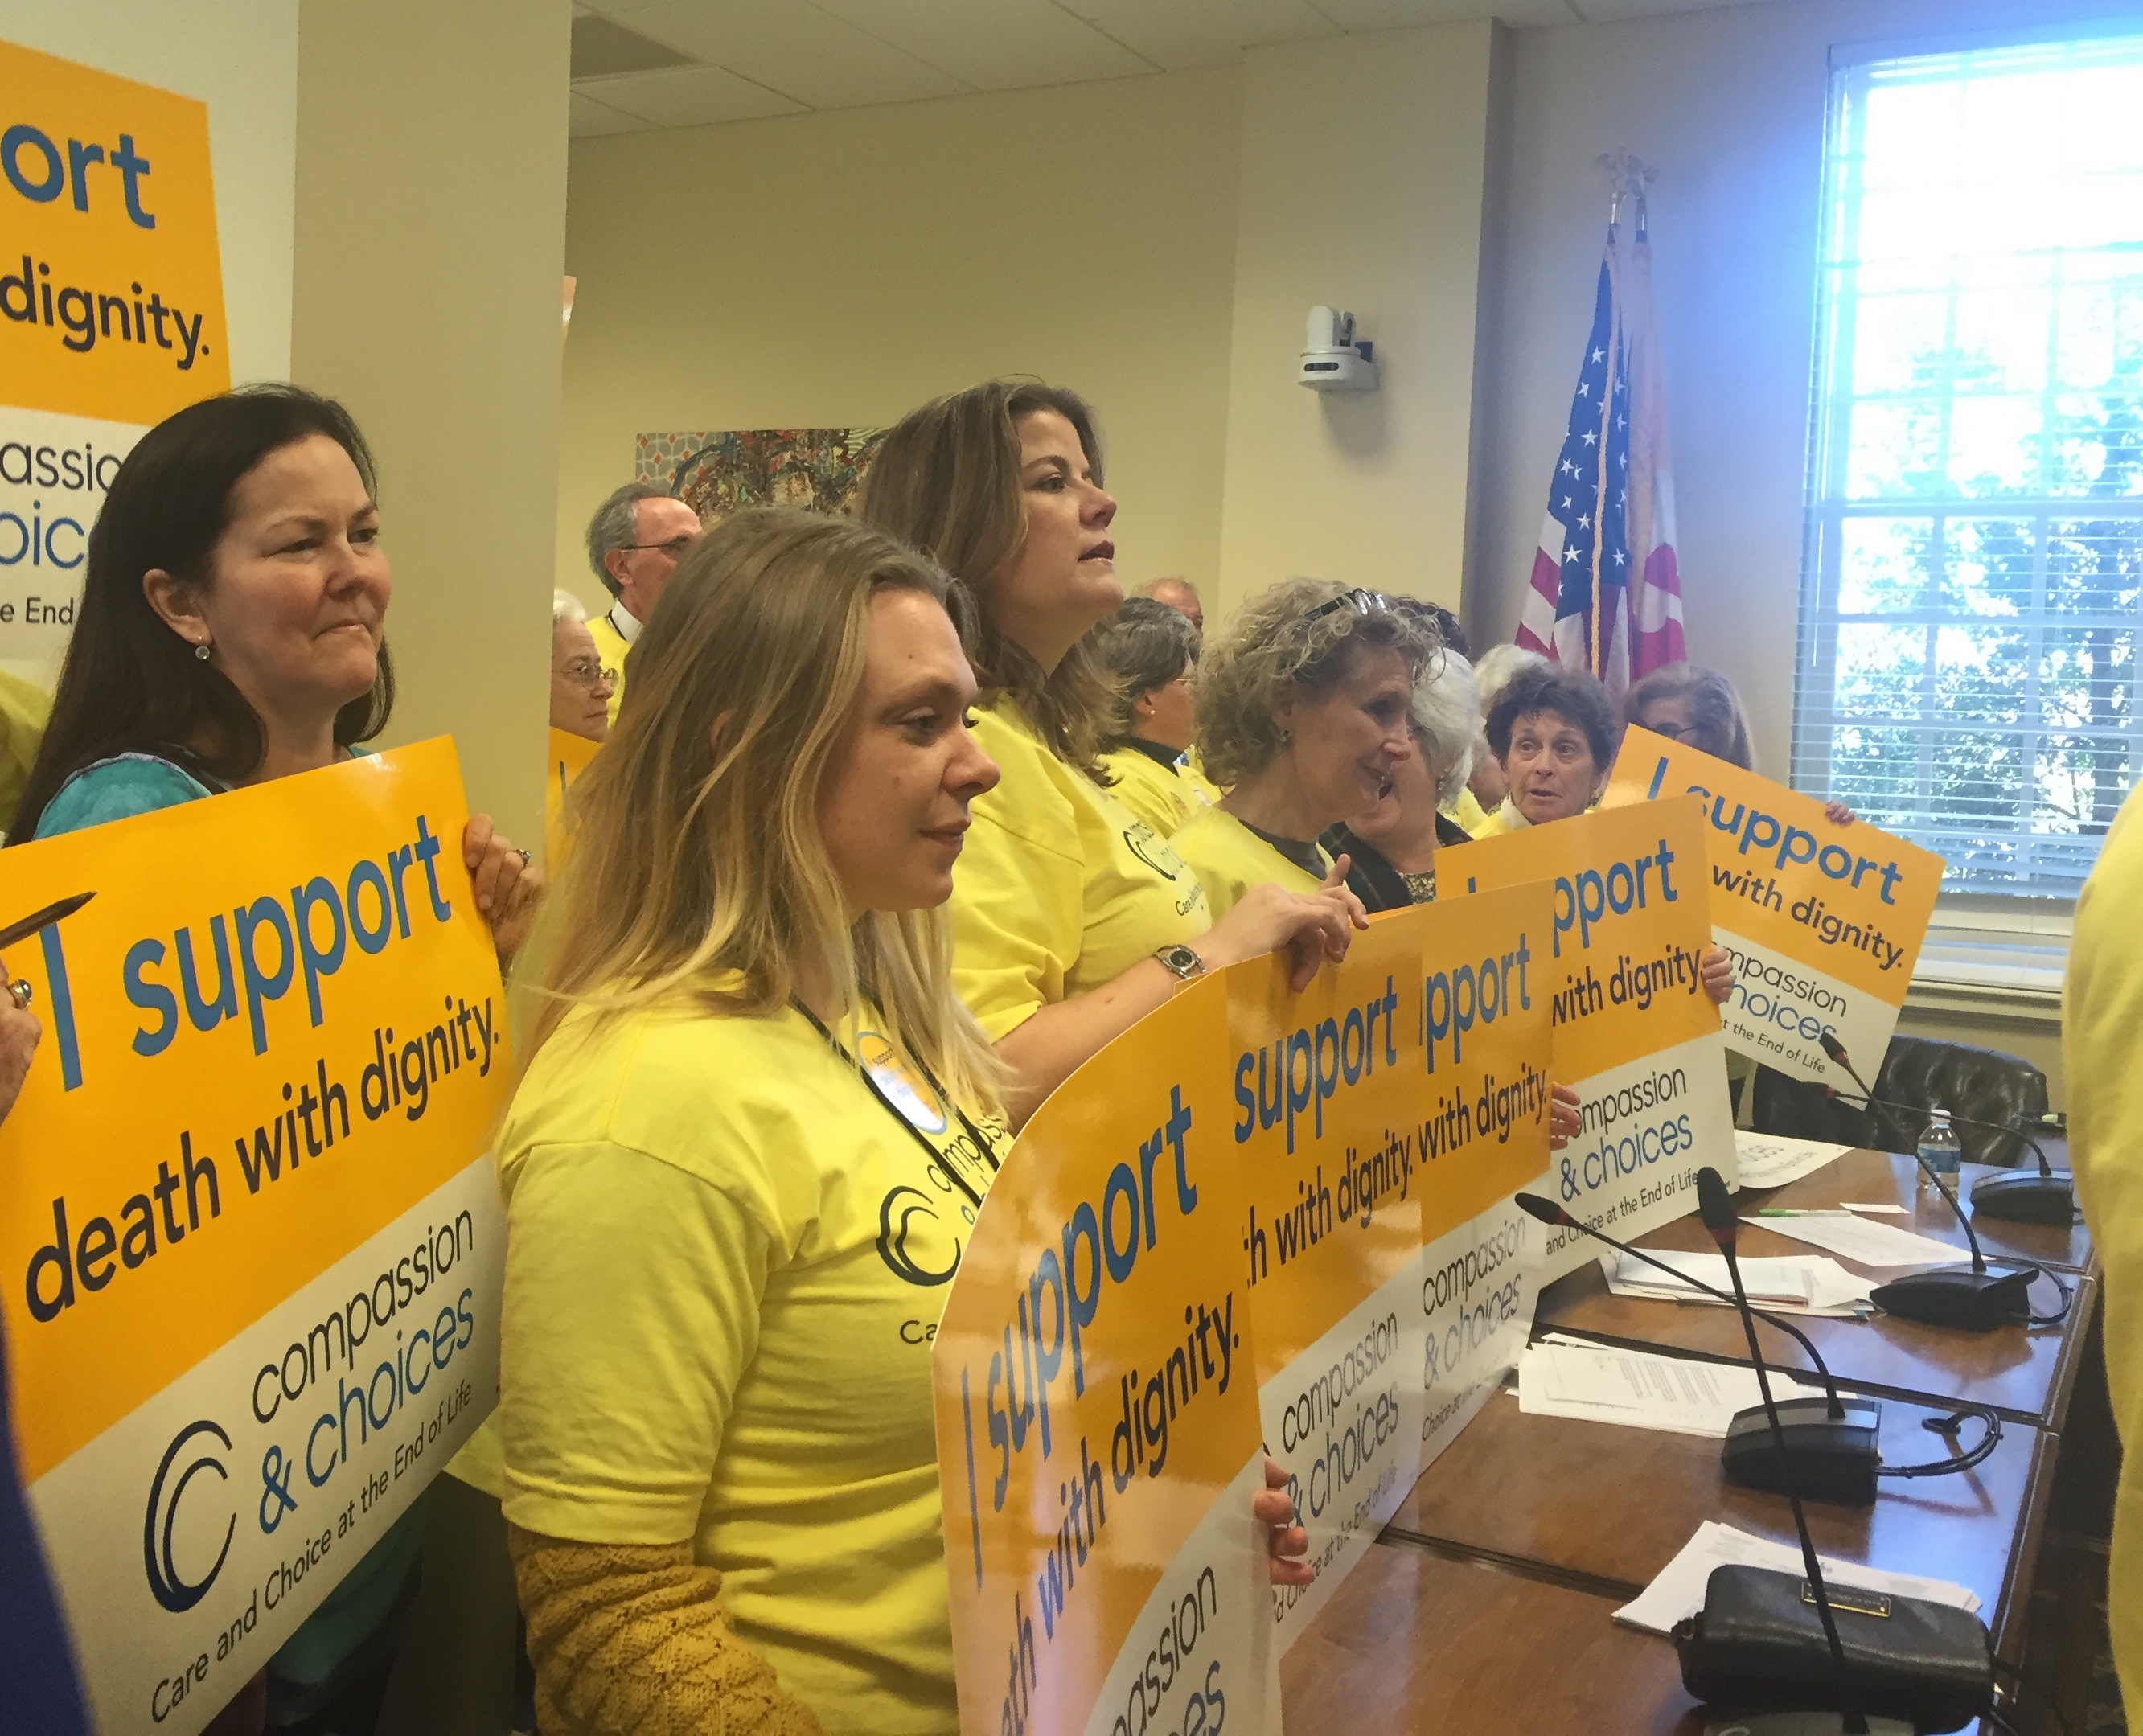 Kaili Van Waveren, 32 from Frederick, and other volunteers with the nonprofit Compassion & Choices attend a press conference in Annapolis on January 28, 2016 regarding Maryland end of life legislation. (Capital News Service photo by Lexie Schapitl)